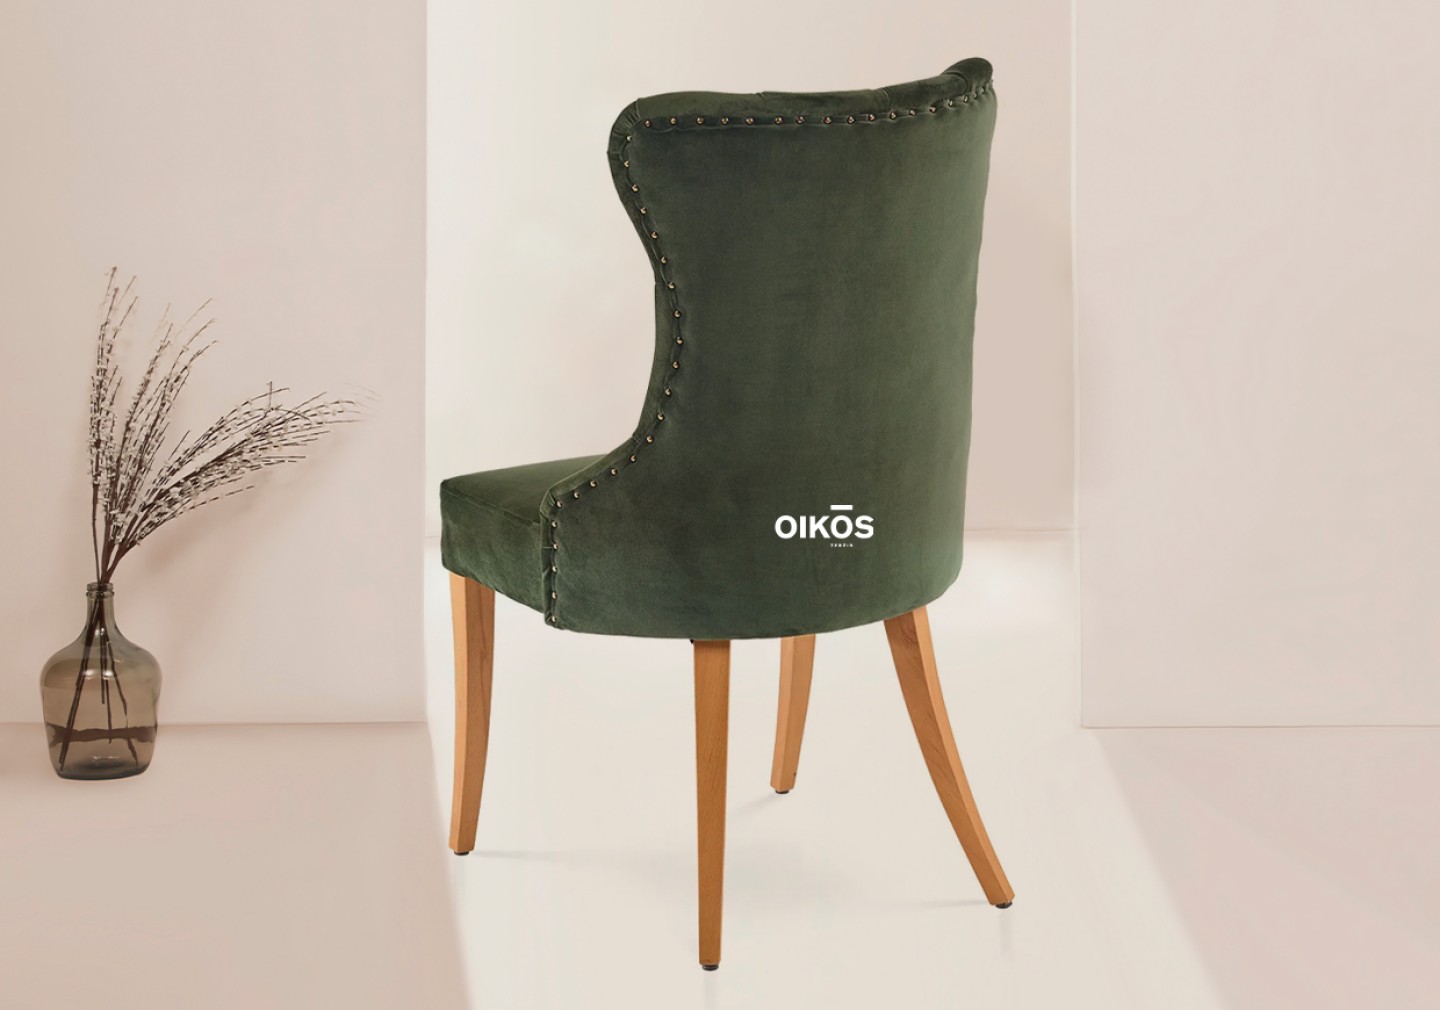 THE KAIA DINING CHAIR